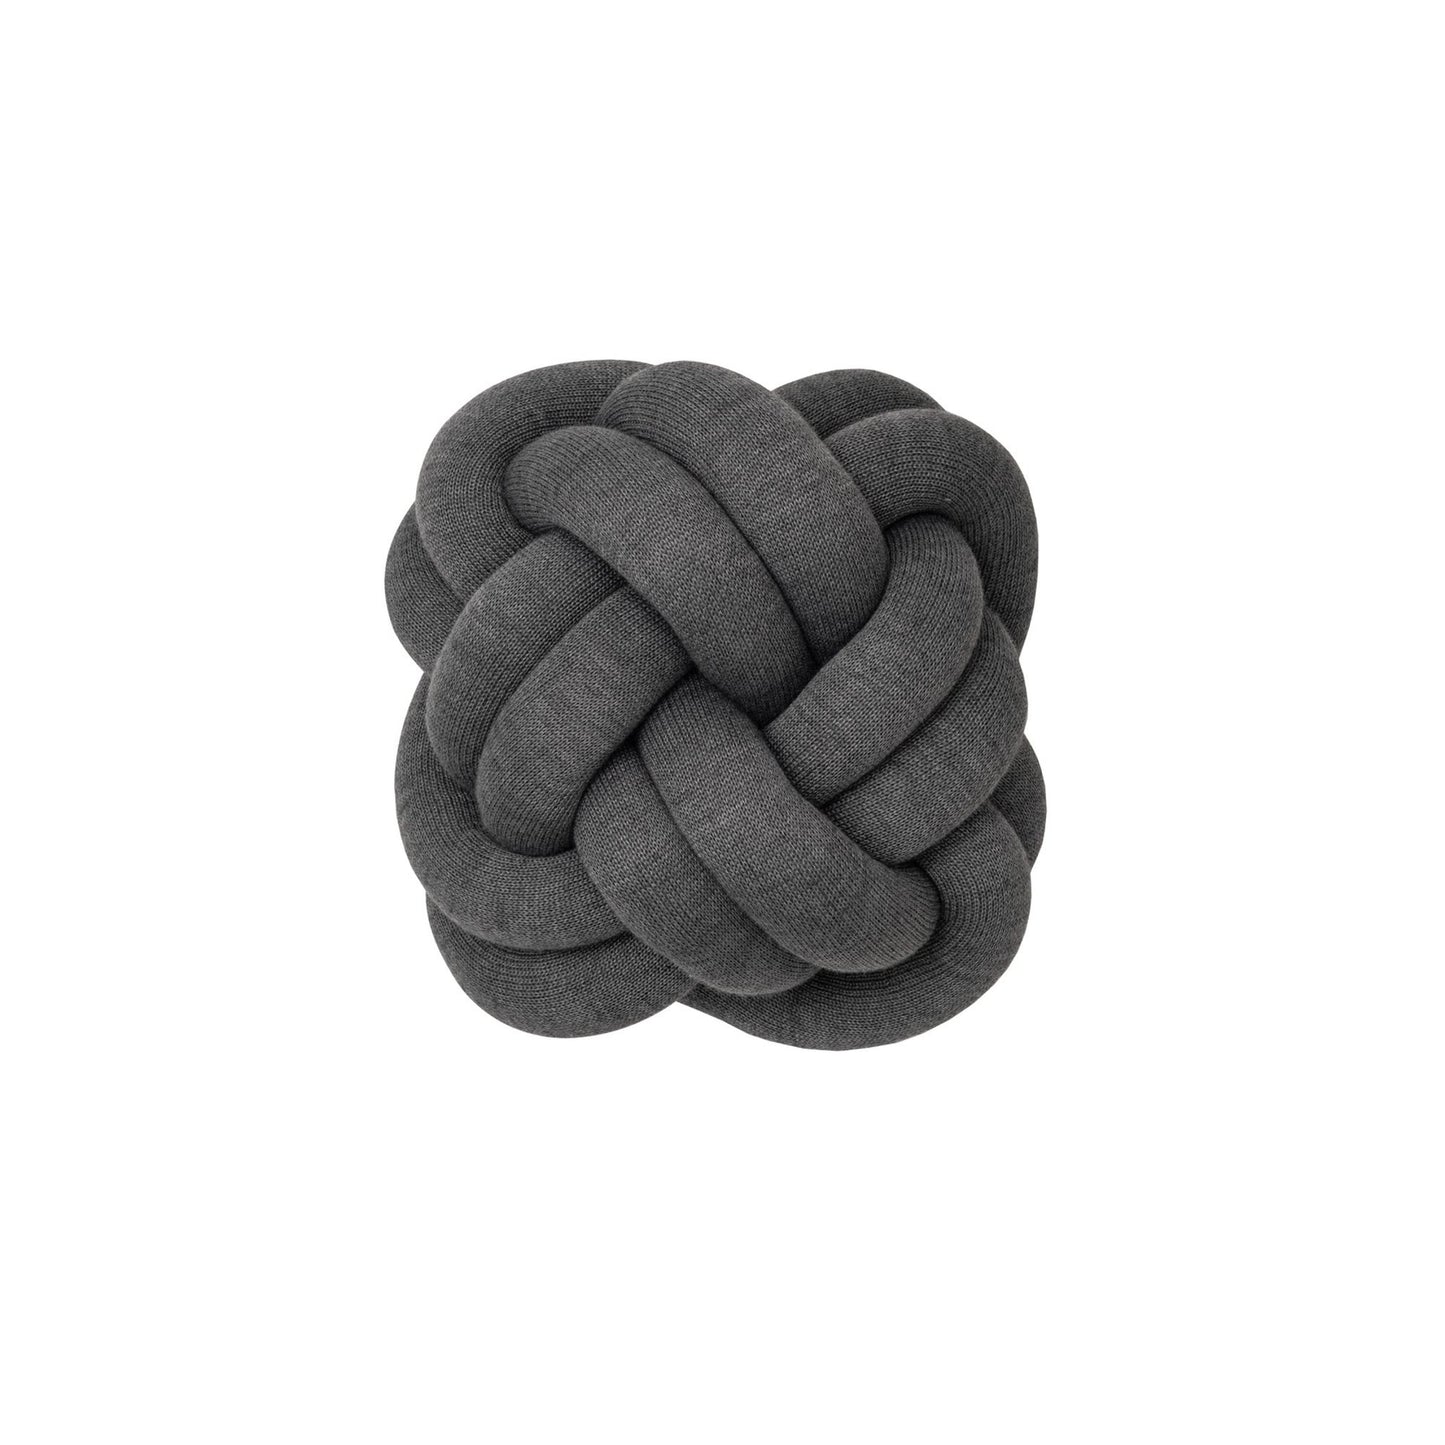 Knot Cushion by Design House Stockholm #Gray